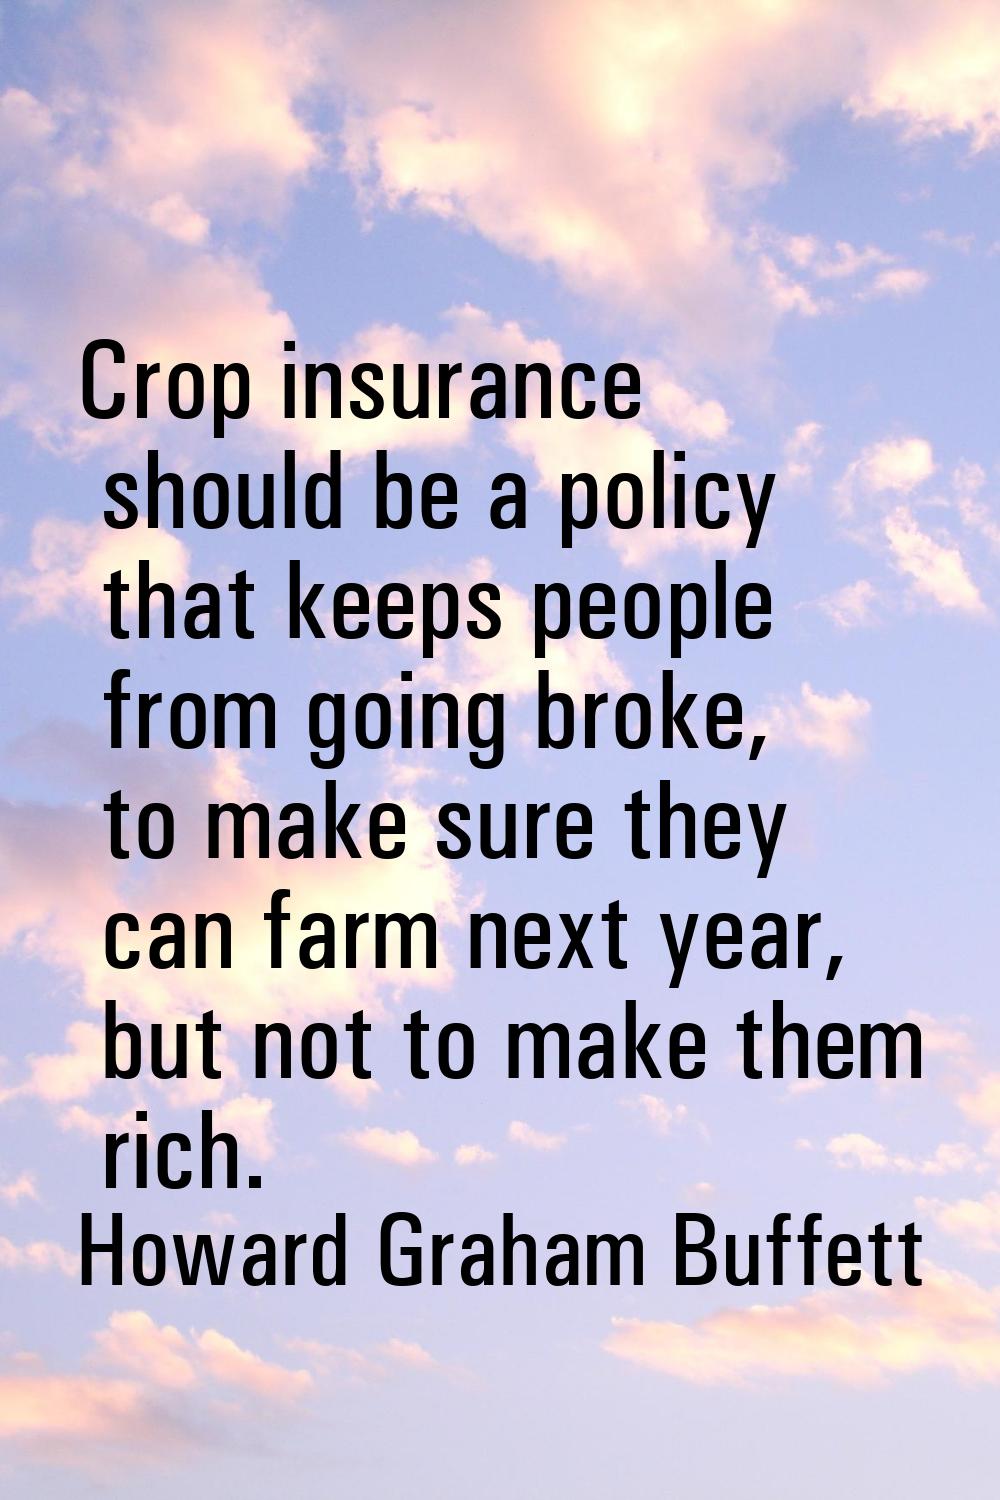 Crop insurance should be a policy that keeps people from going broke, to make sure they can farm ne